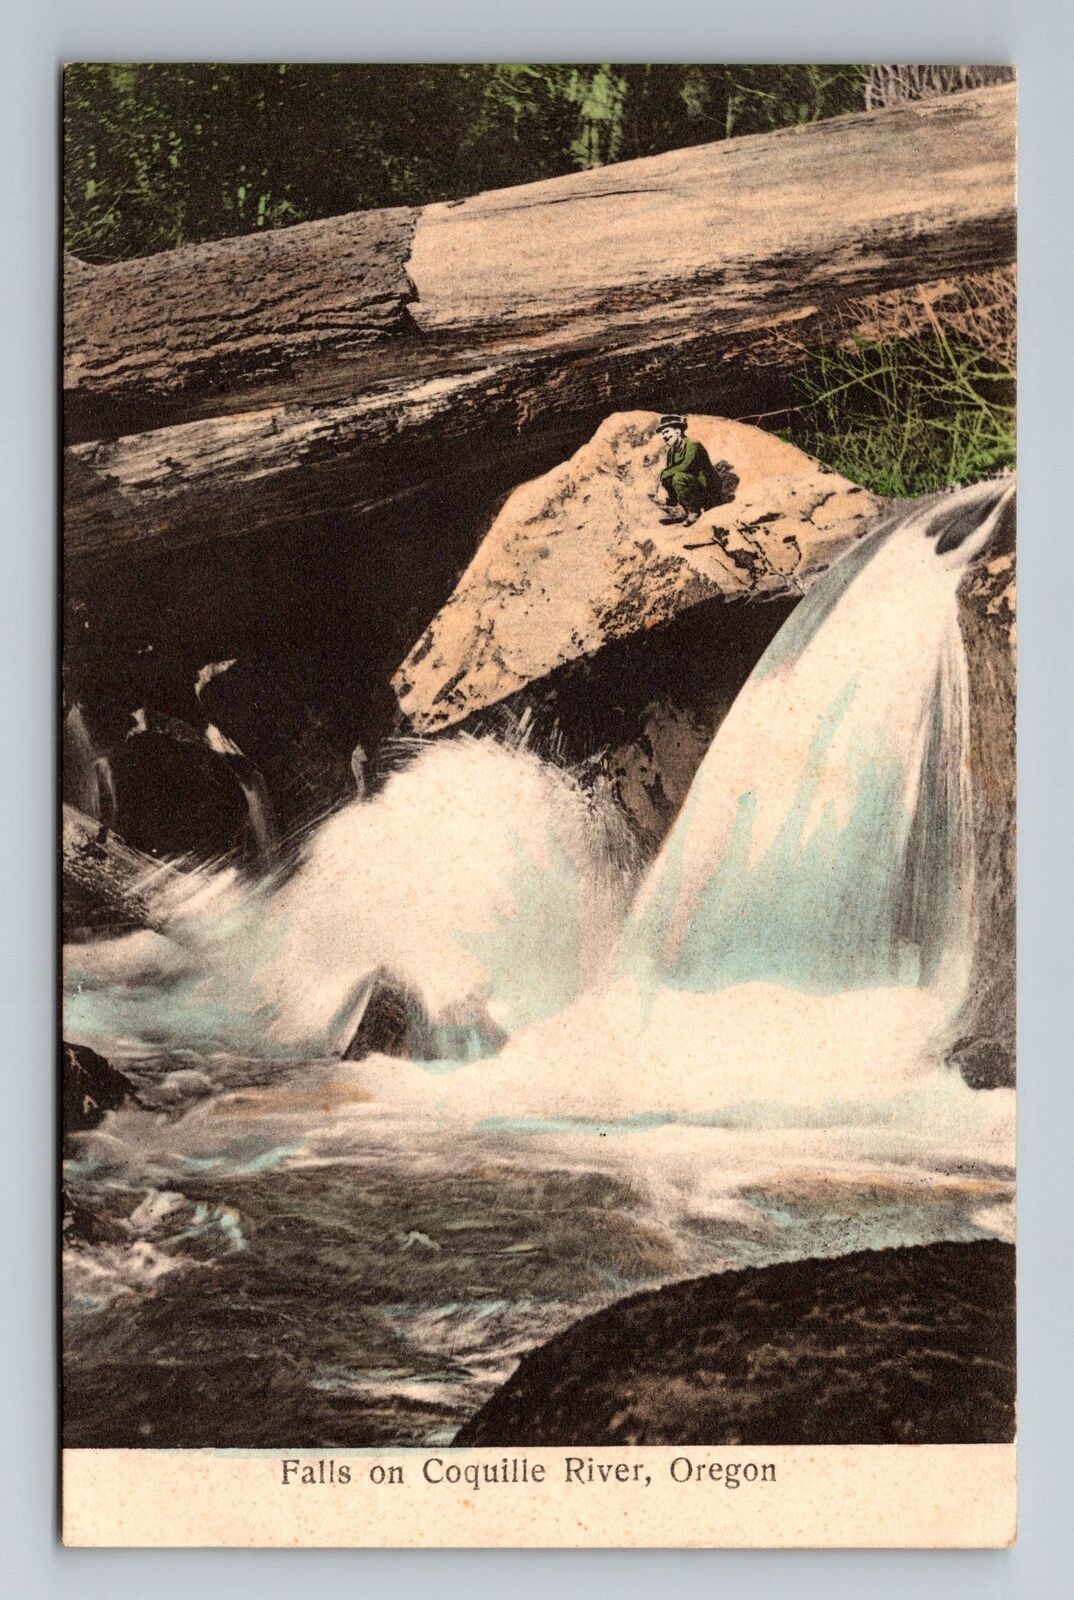 OR-Oregon, Falls On Coquille River, Scenic View, Vintage Postcard